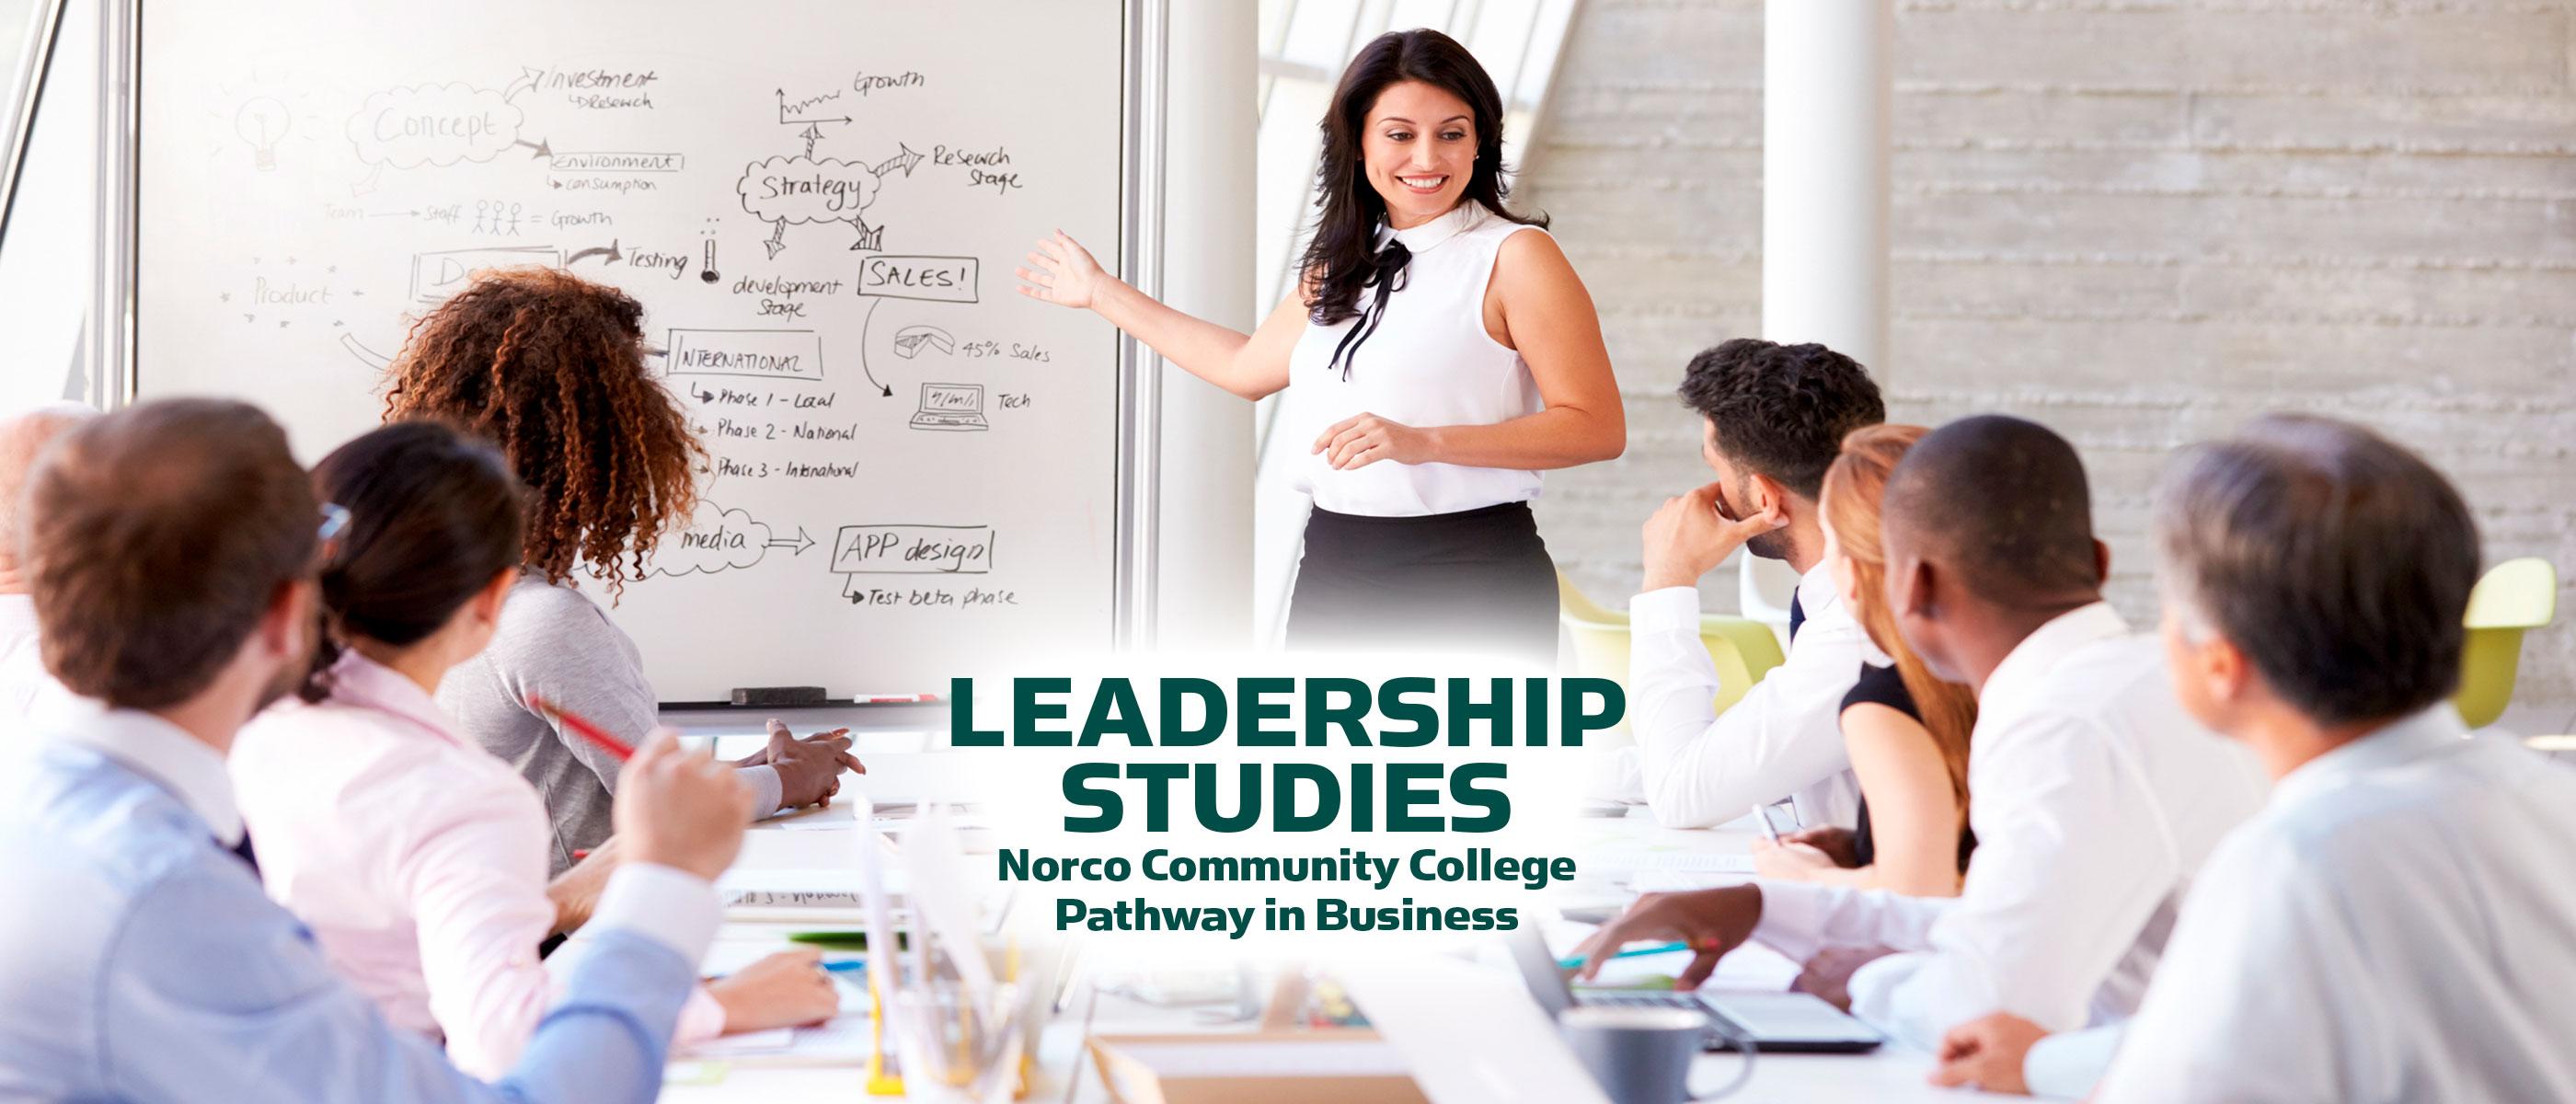 Norco Community College Pathway in Business